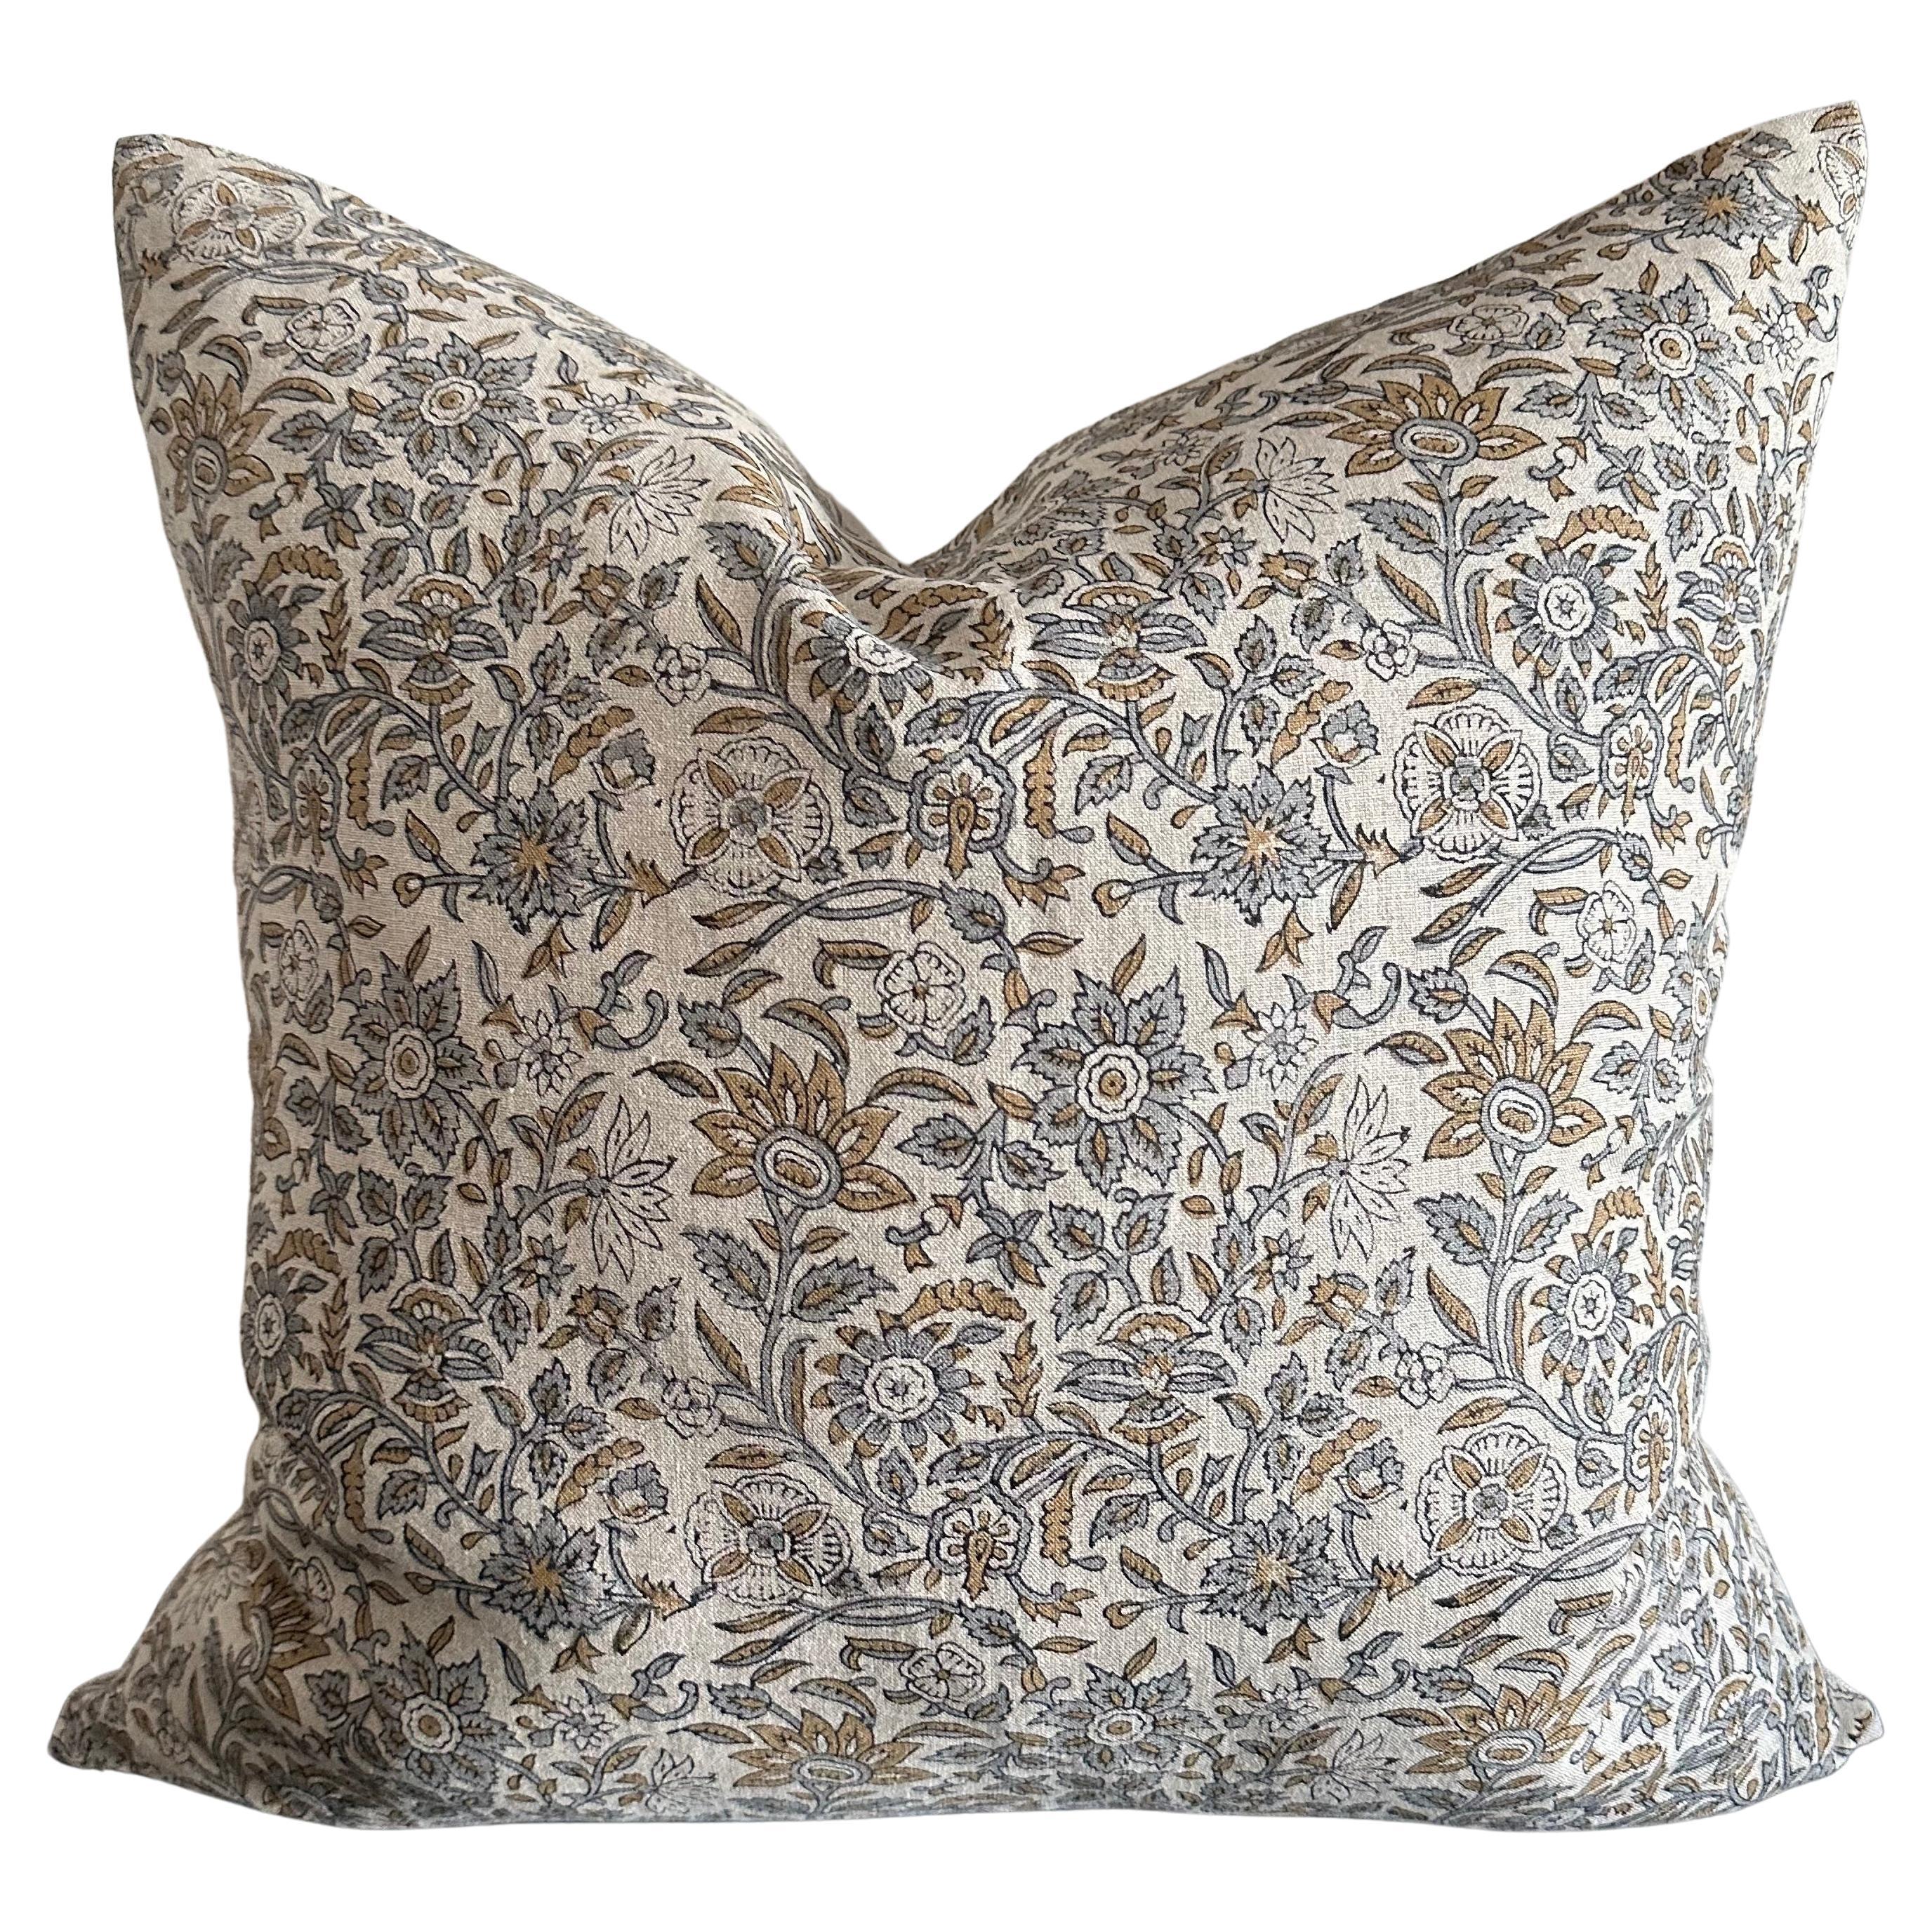 Visalia Block Printed Linen Pillow with Down Feather Insert